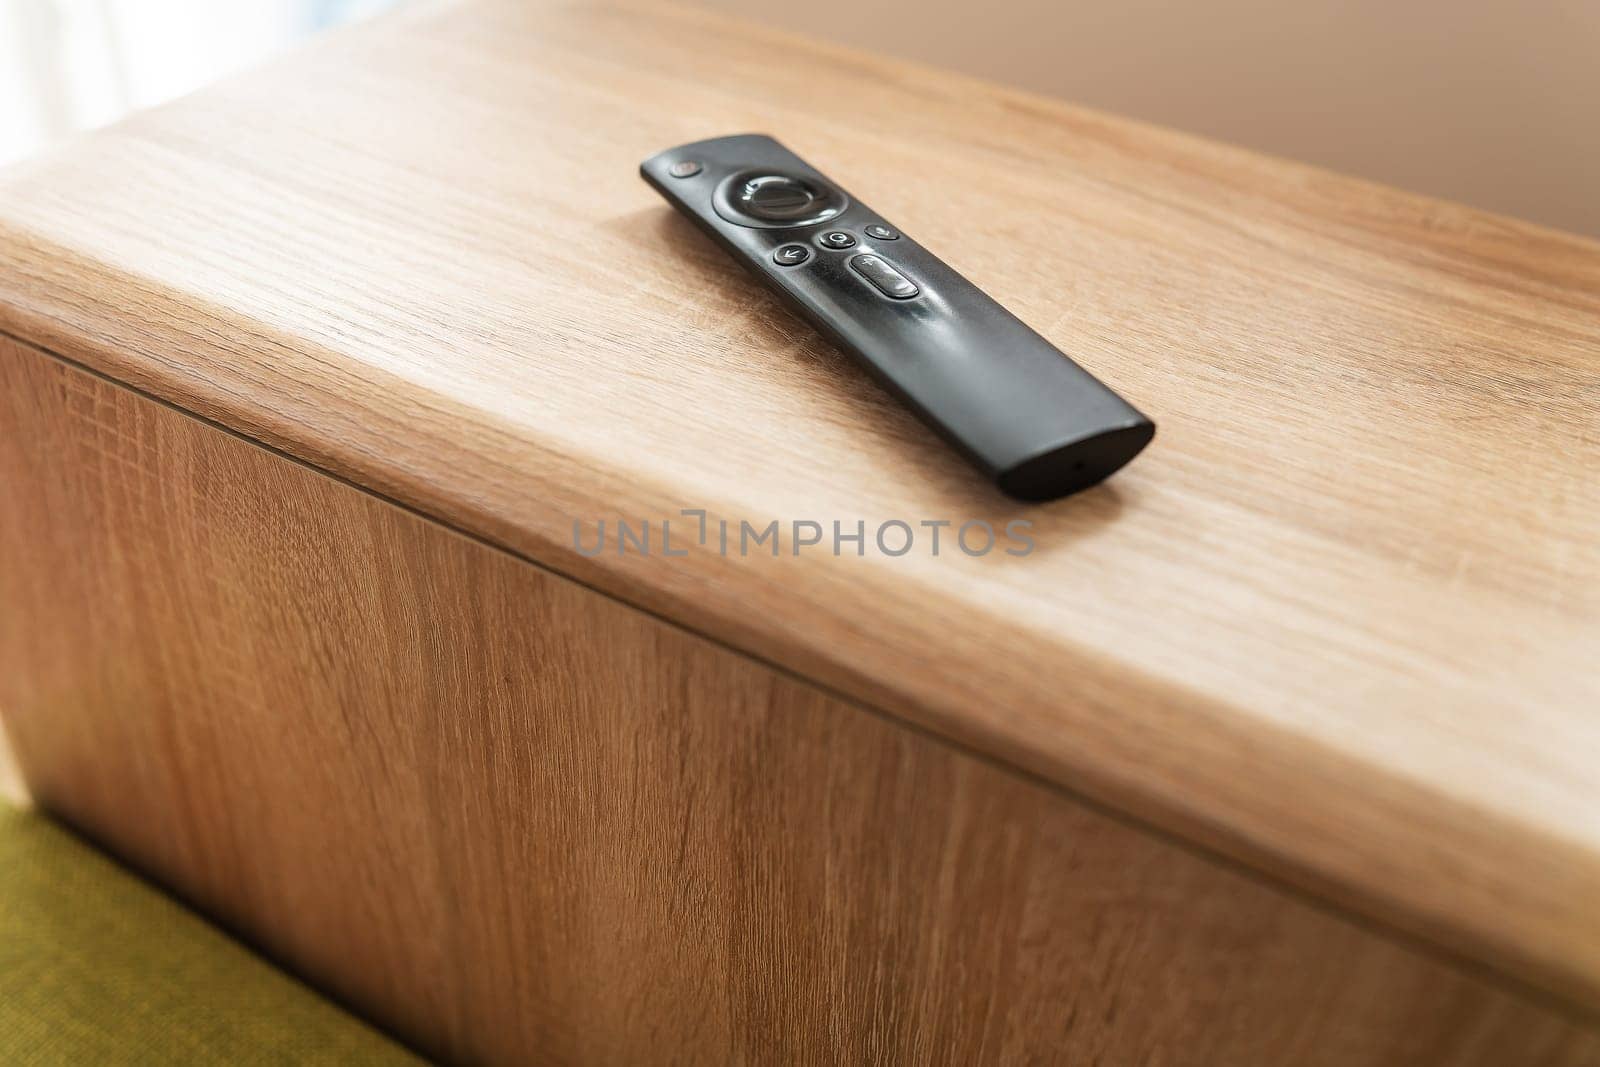 A black remote control on a wooden surface. The remote is in focus and the background is blurred